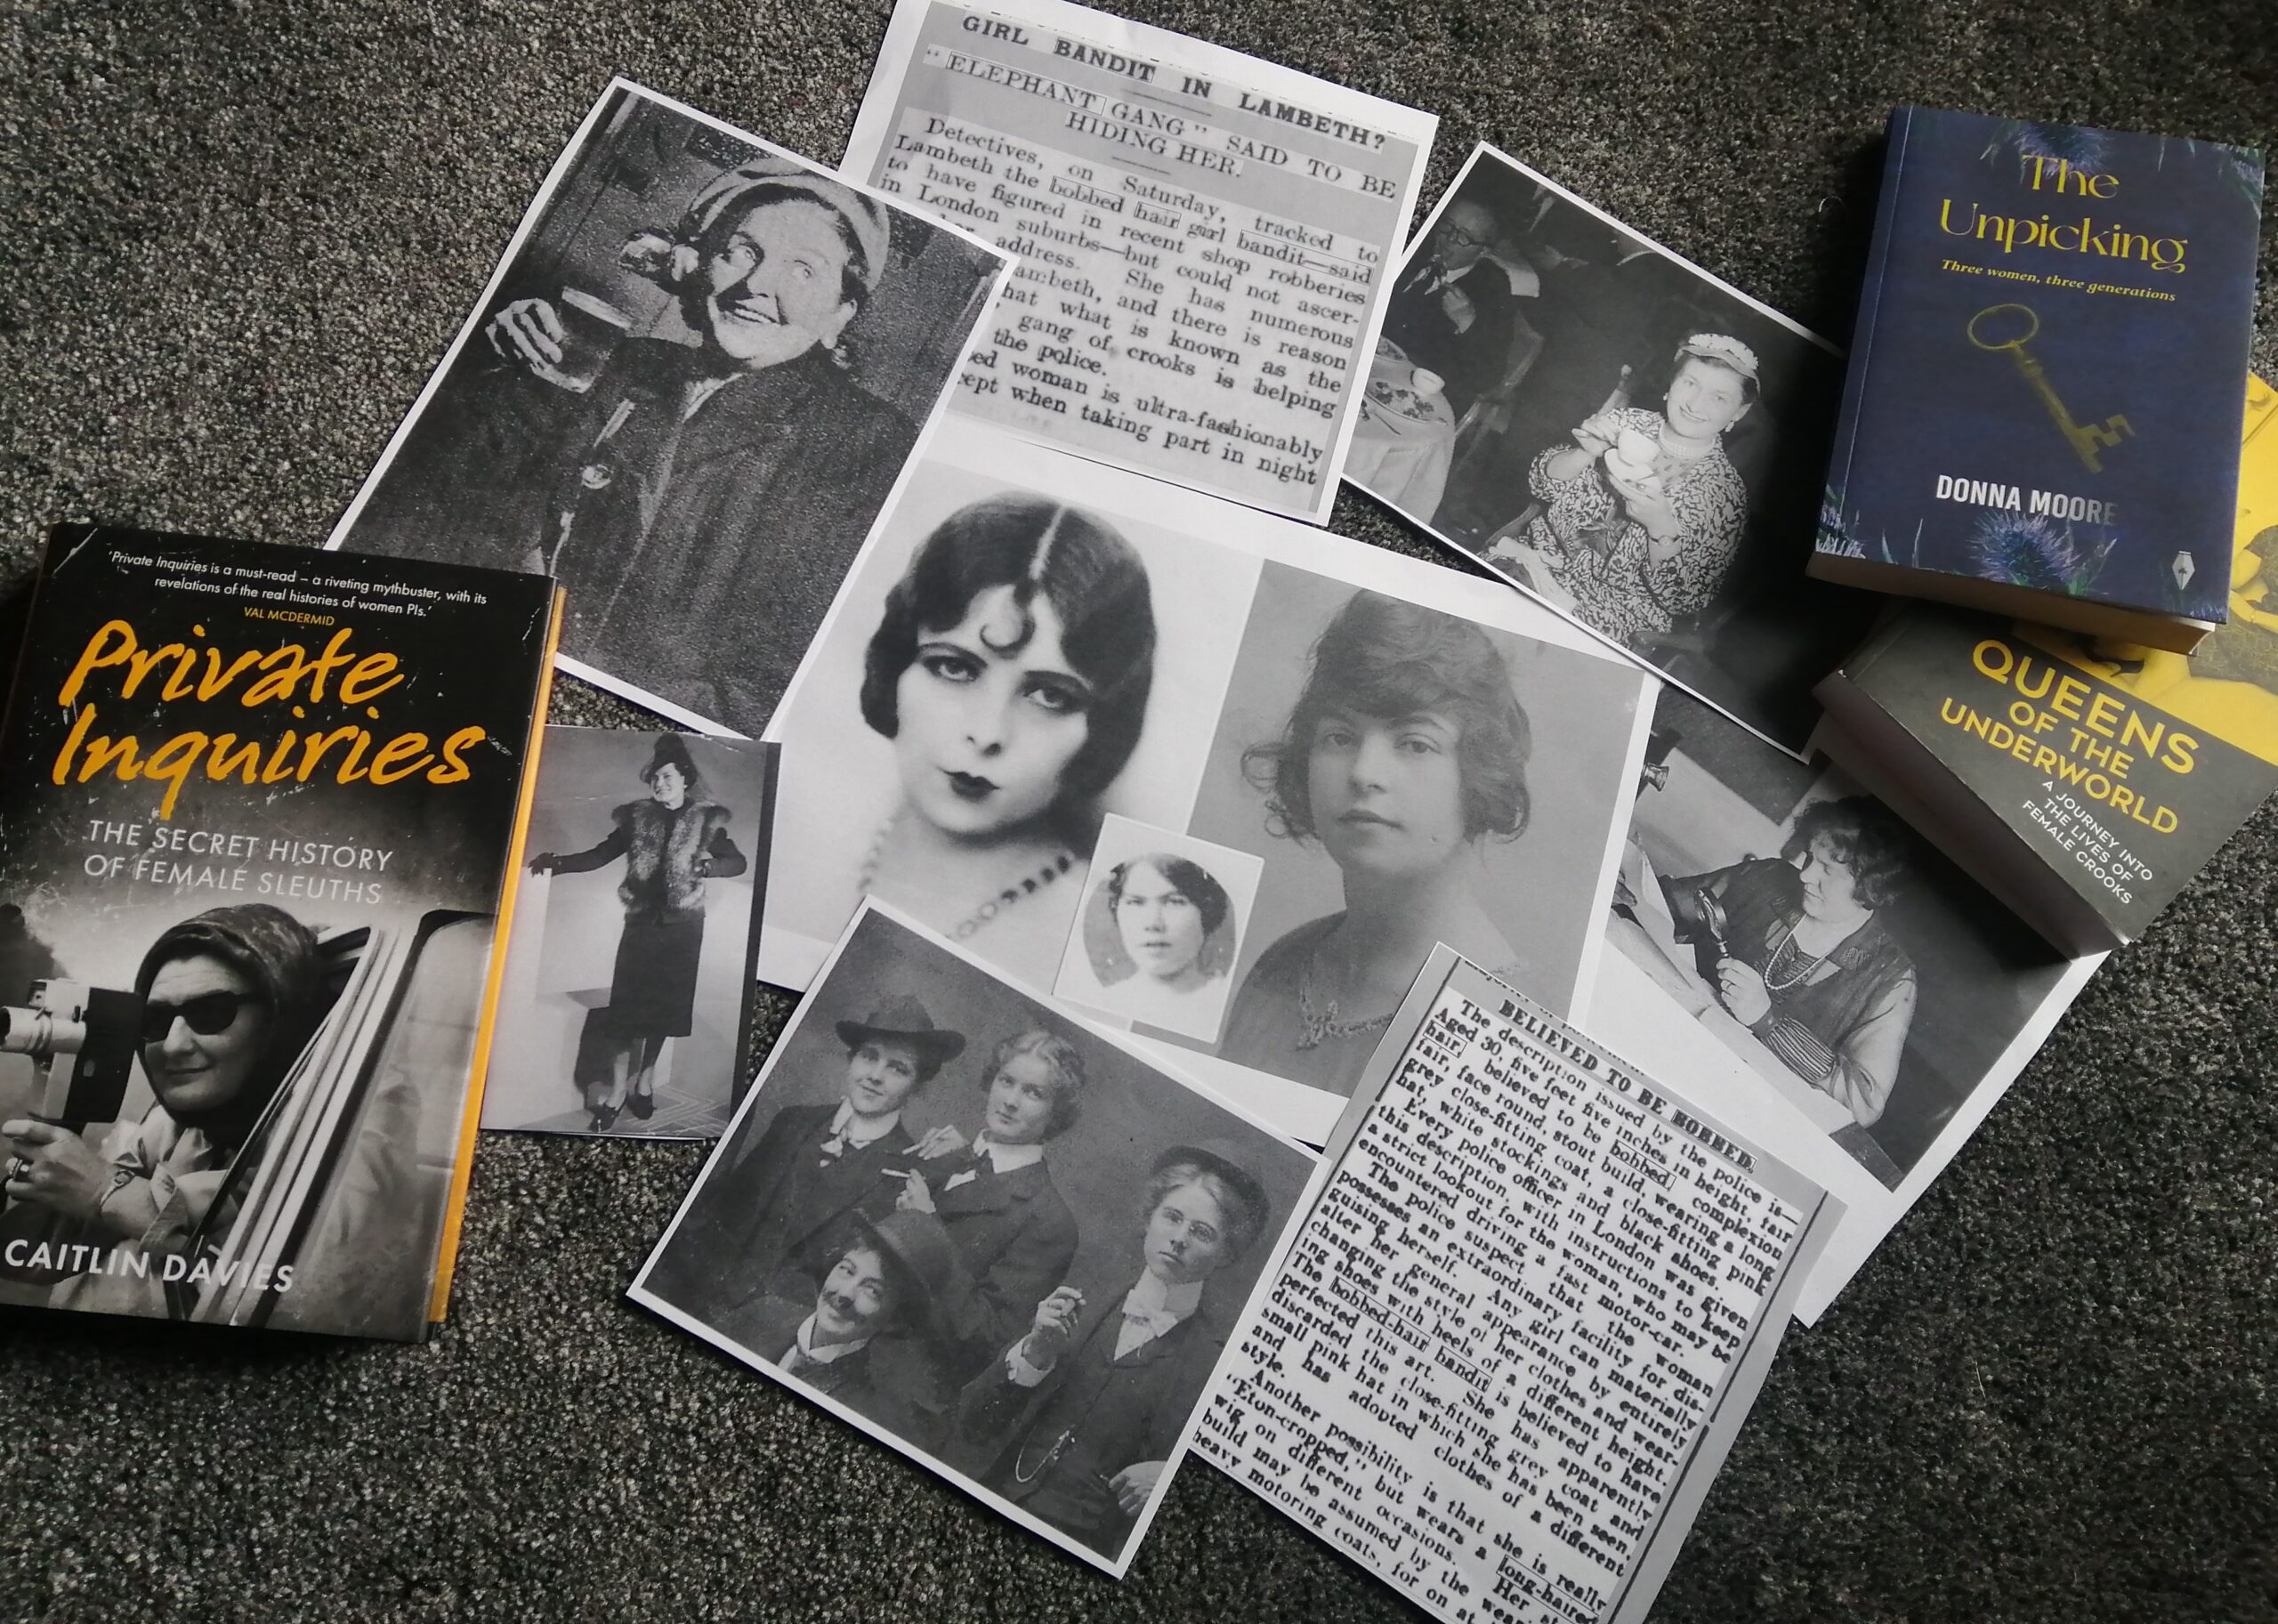 A colour photograph of a selection of black and white photographs, scanned newspaper records, and two books laid out on a carpeted floor.